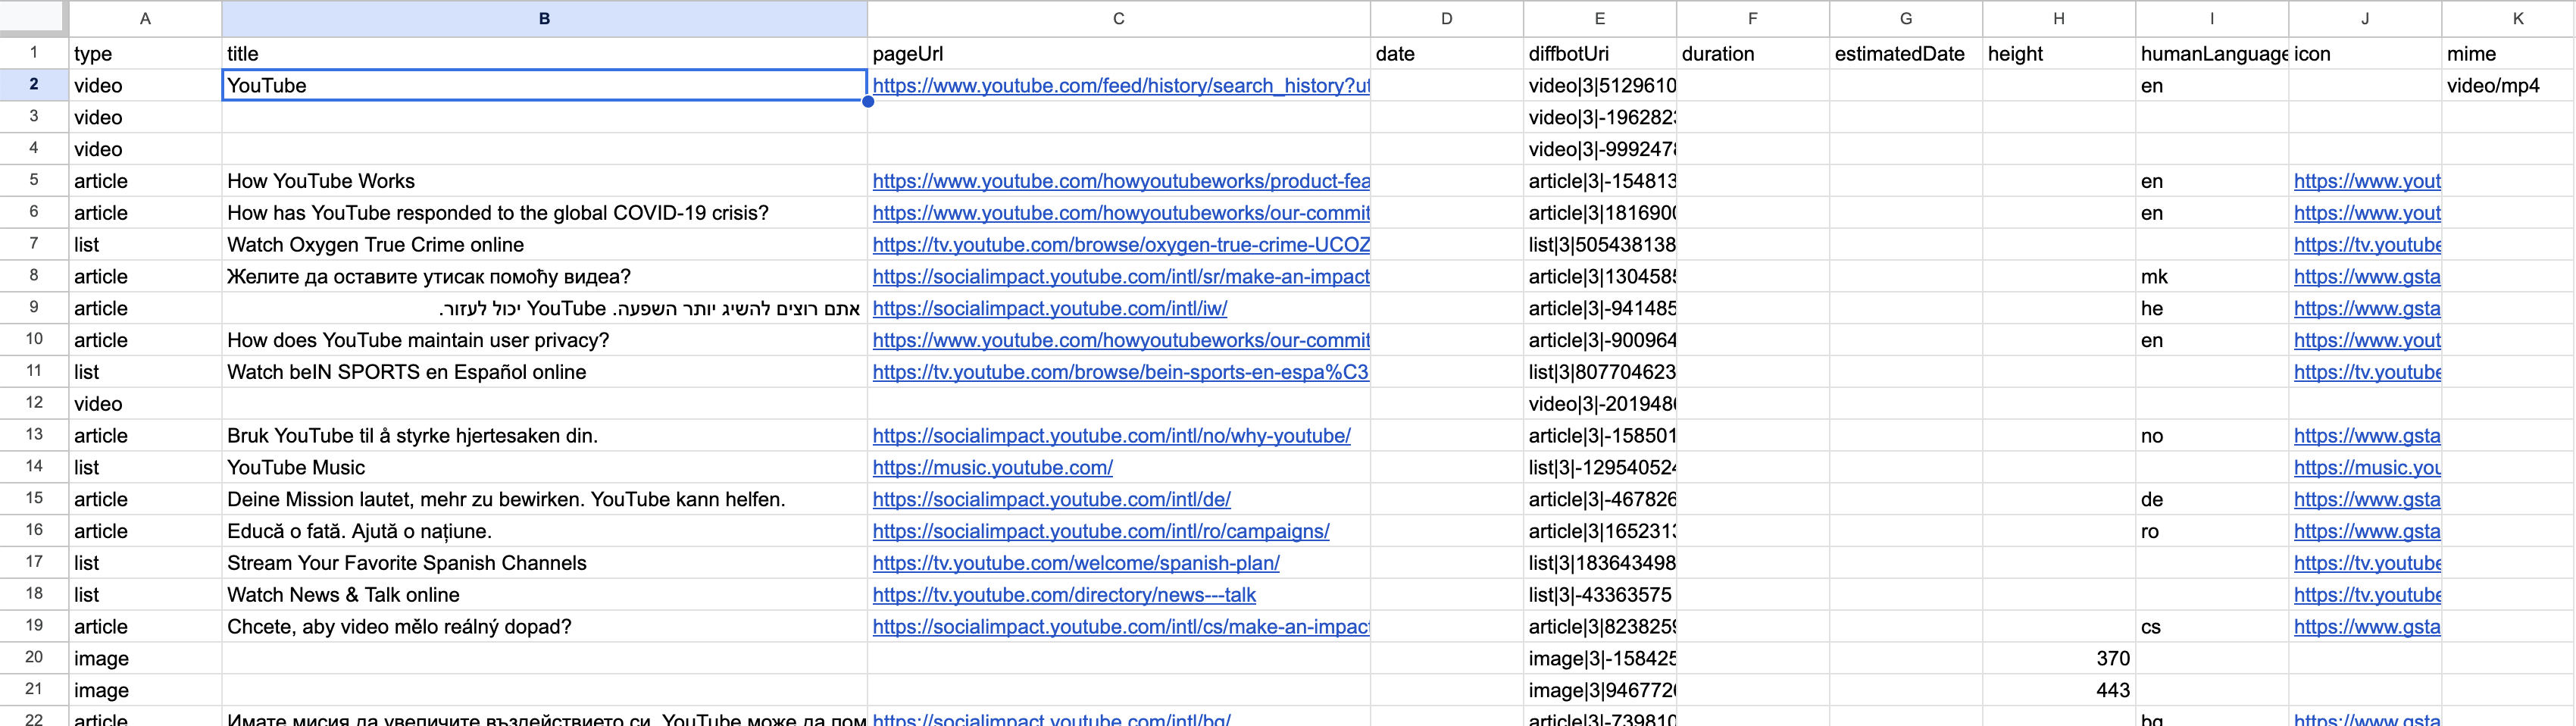 Screenshot of a spreadsheet revealing a sample of URLs extracted from youtube.com